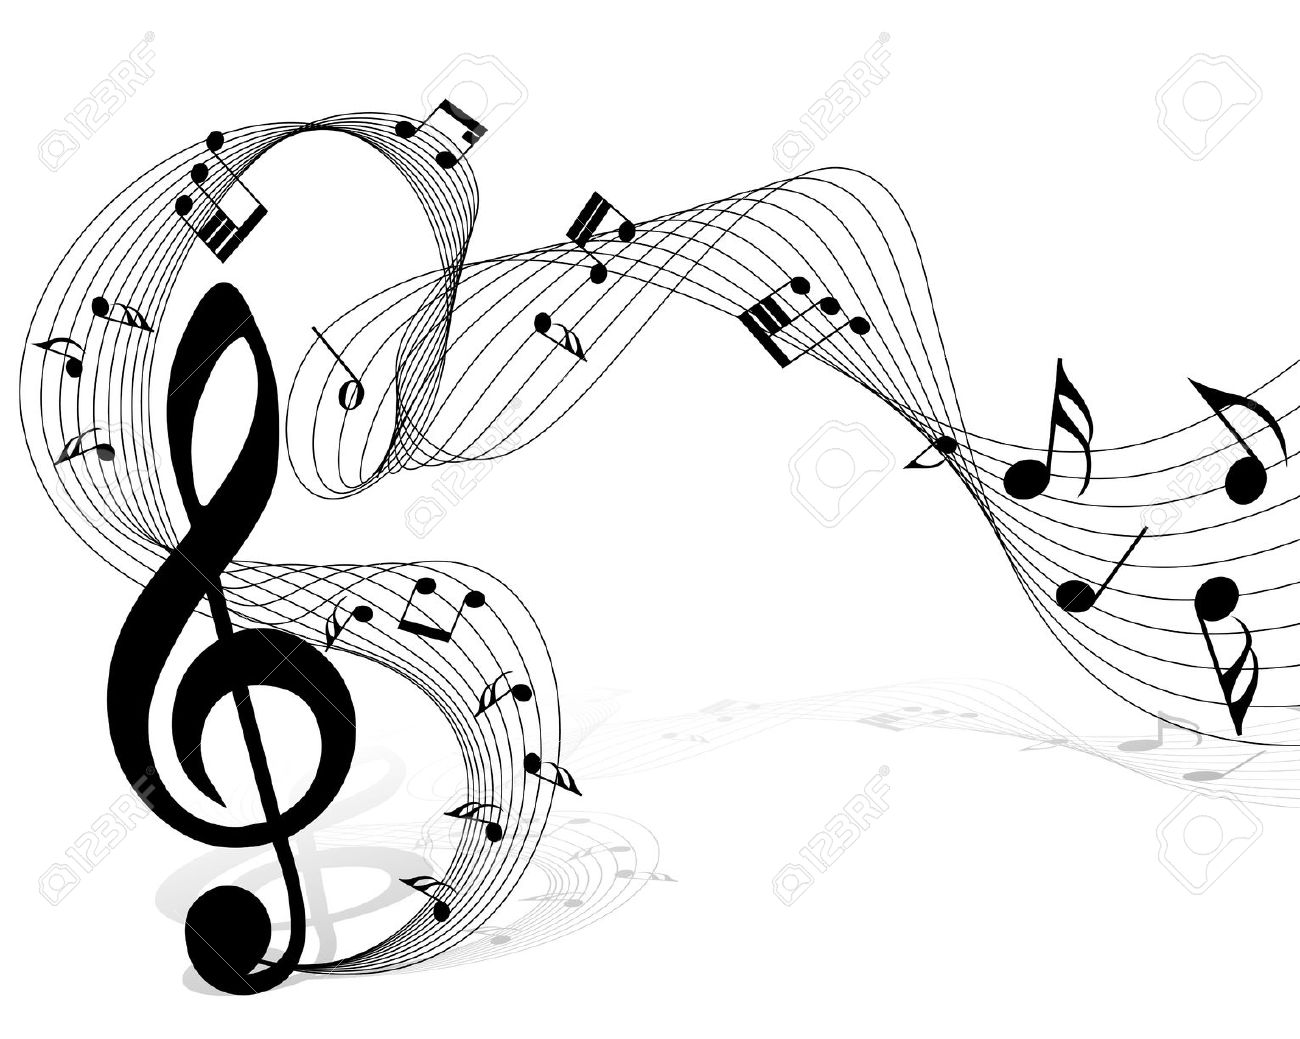 clip art floating music notes - photo #27